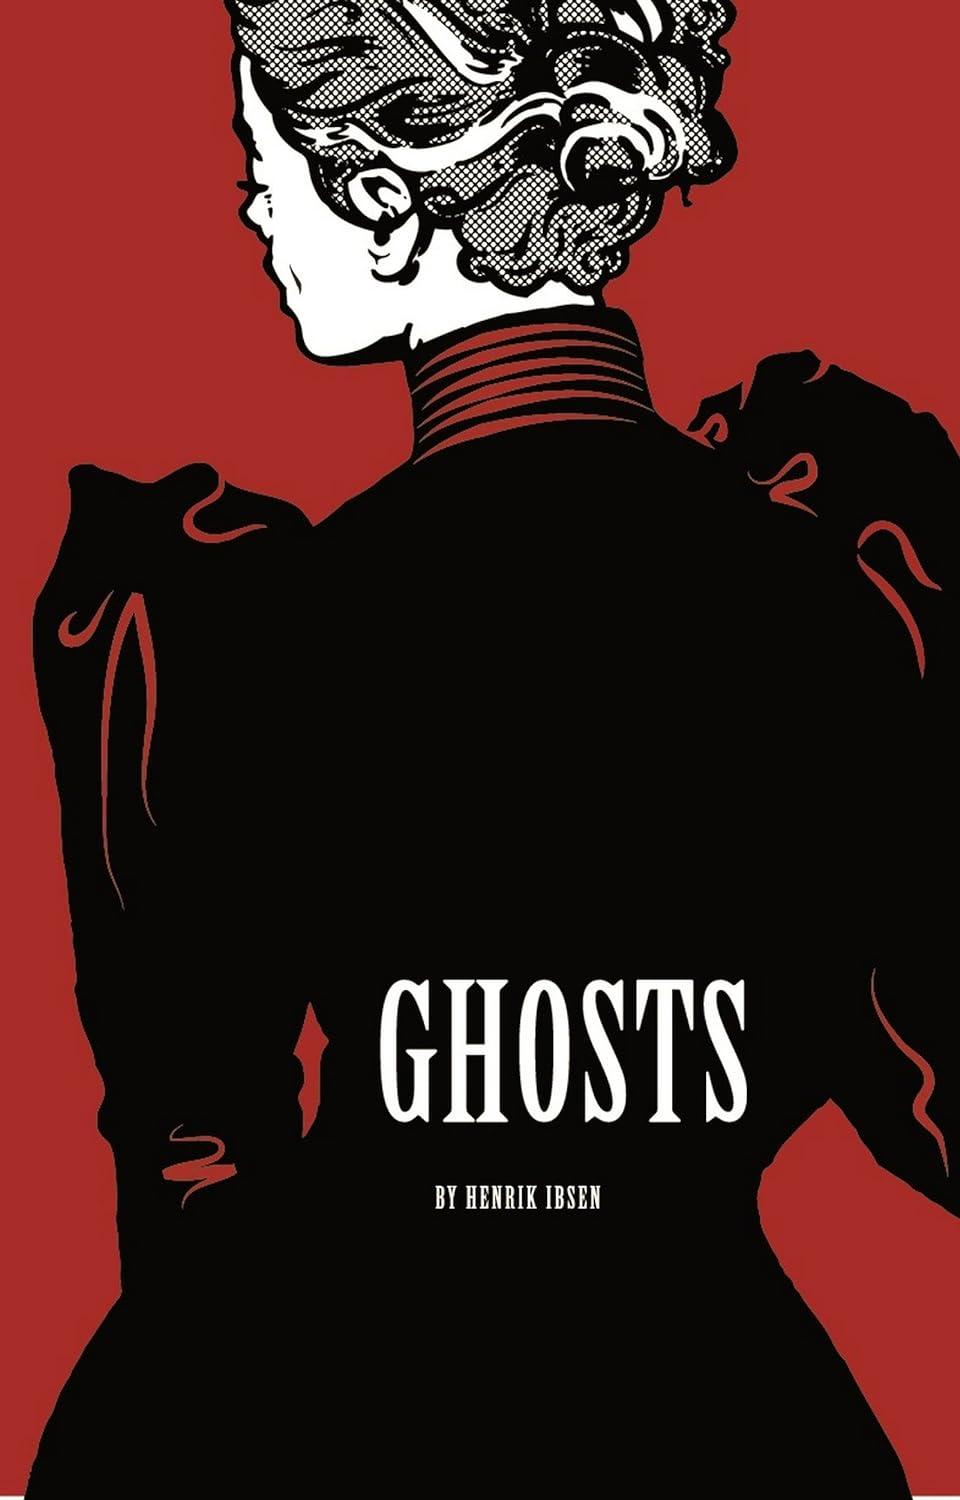 Ghosts by Henrik Ibsen: Study Guide, Themes & Literary Devices